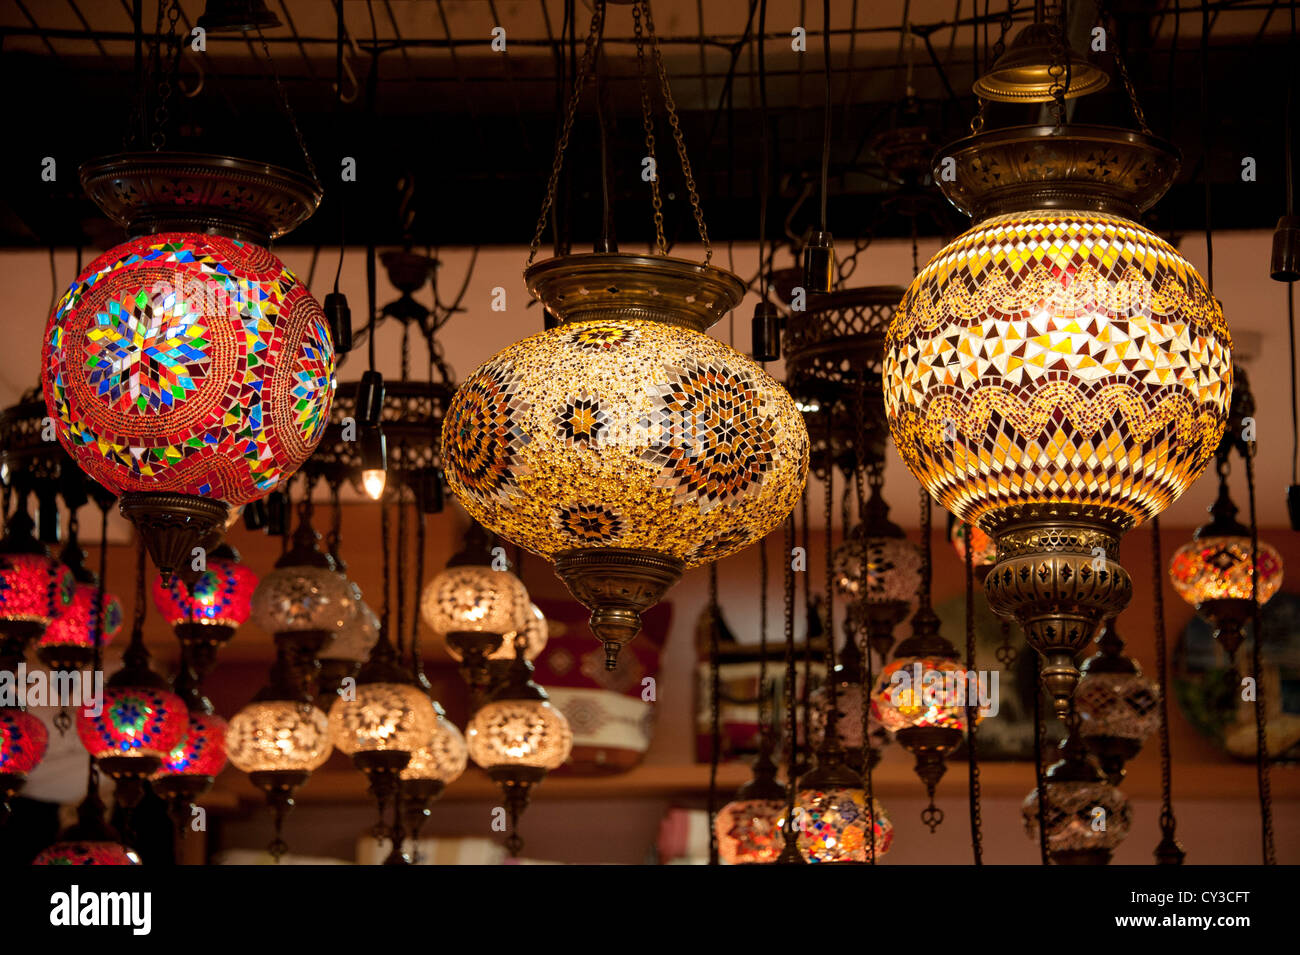 A display of lamps in a shop window in Istanbul Turkey Stock Photo